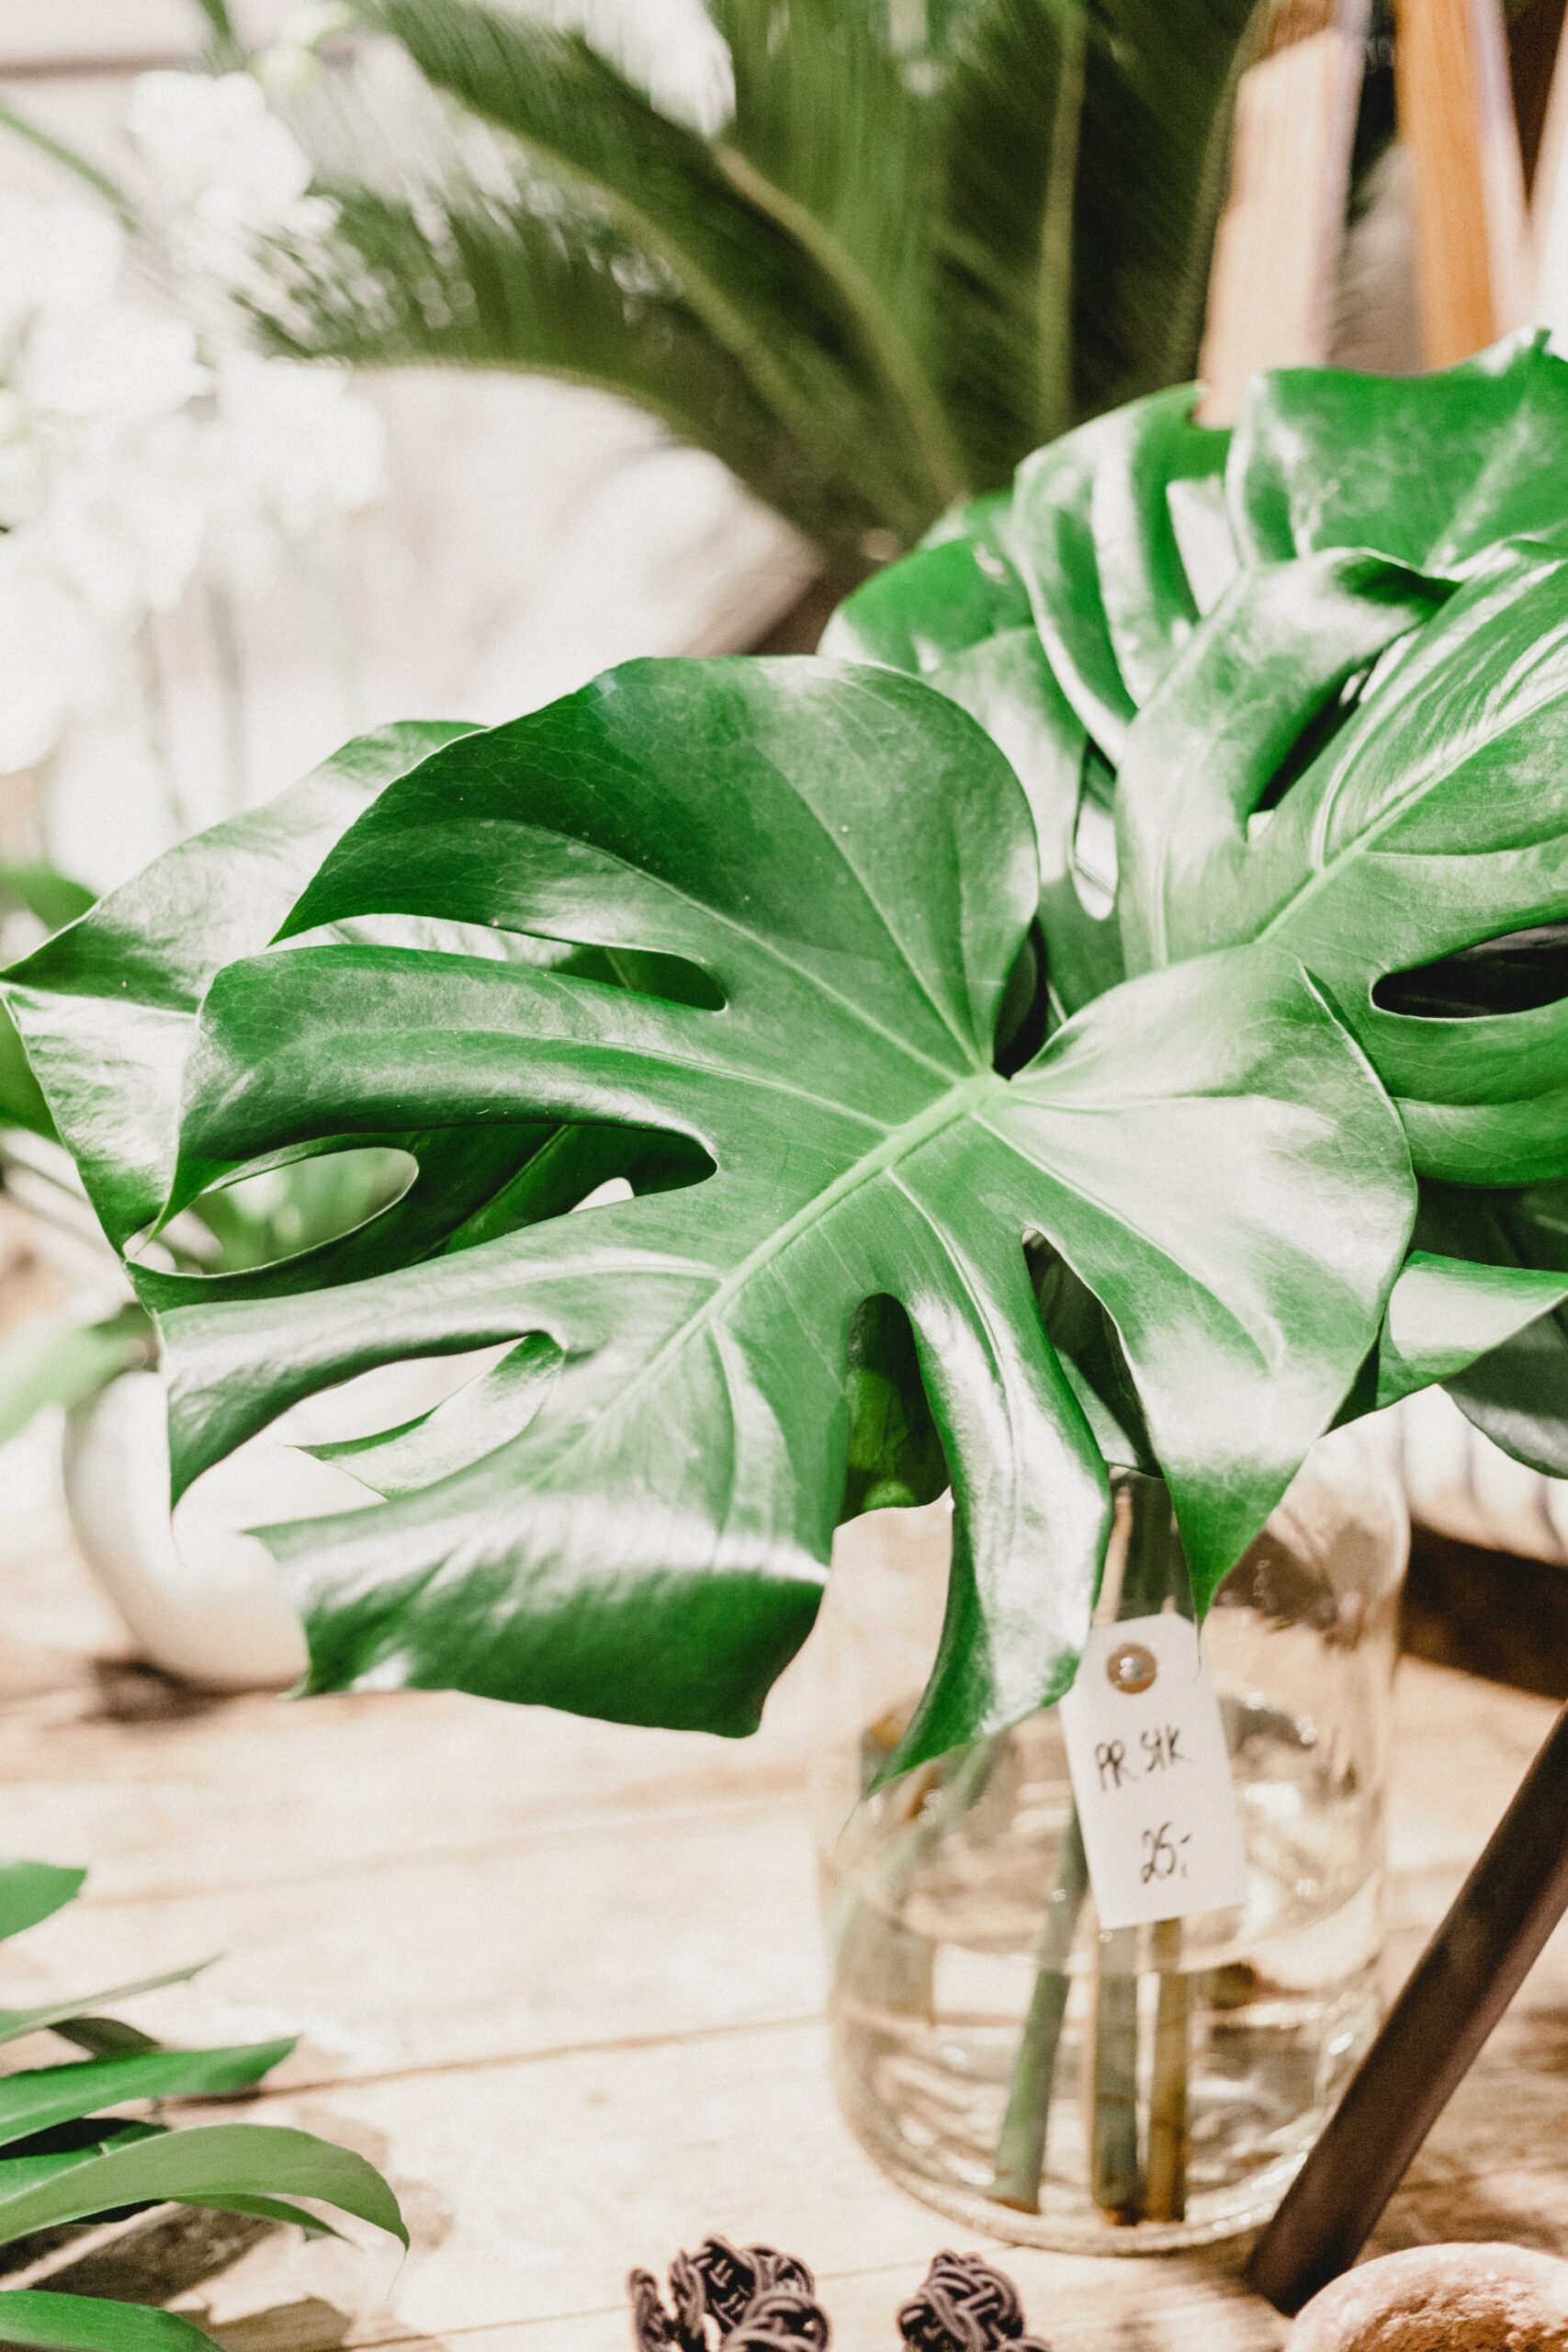 How to care for houseplants in winter